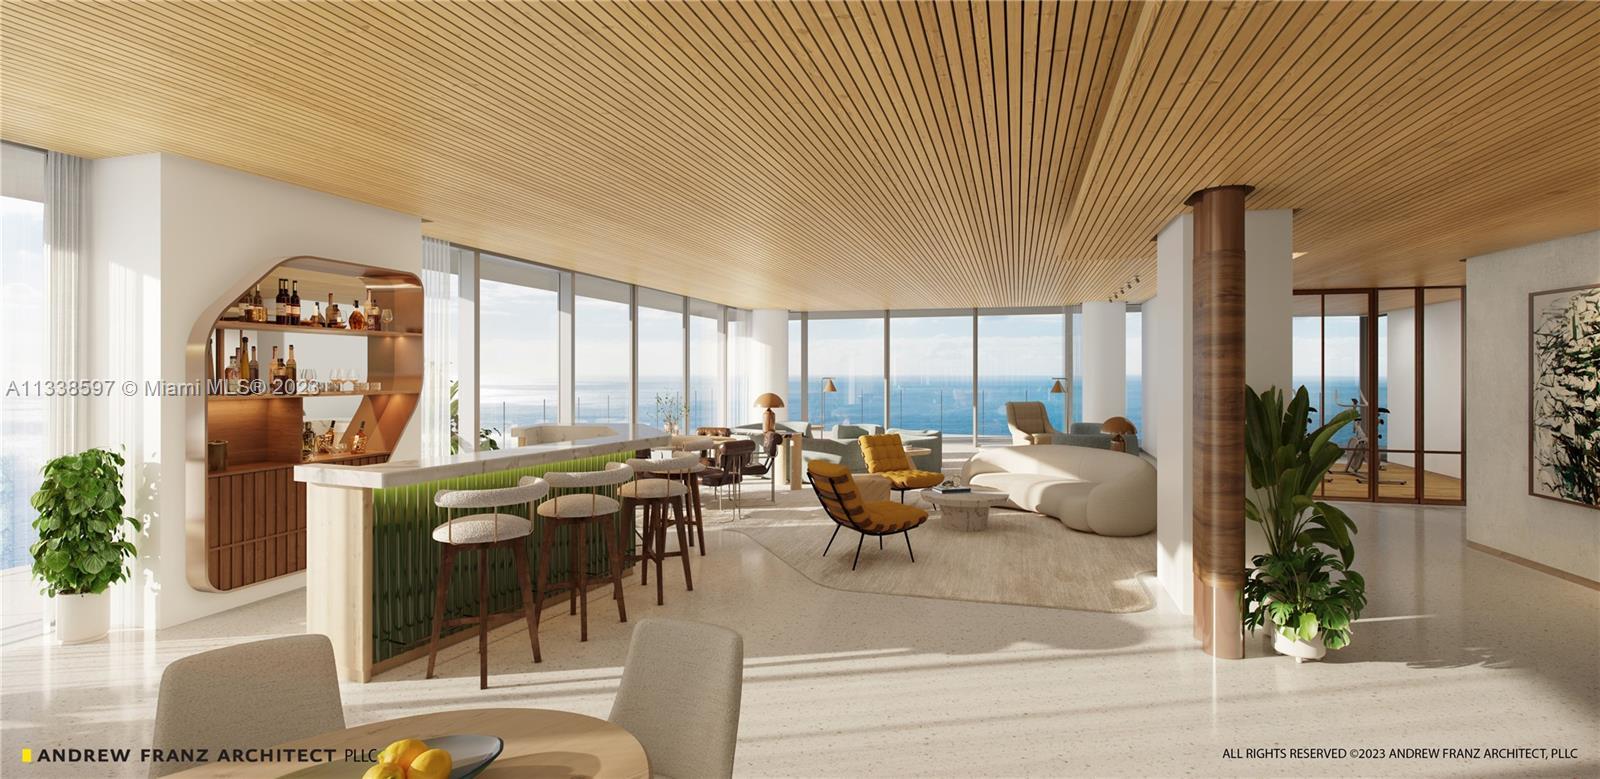 Rare opportunity in Bal Harbour’s most coveted building to customize a one-of-a-kind direct oceanfro